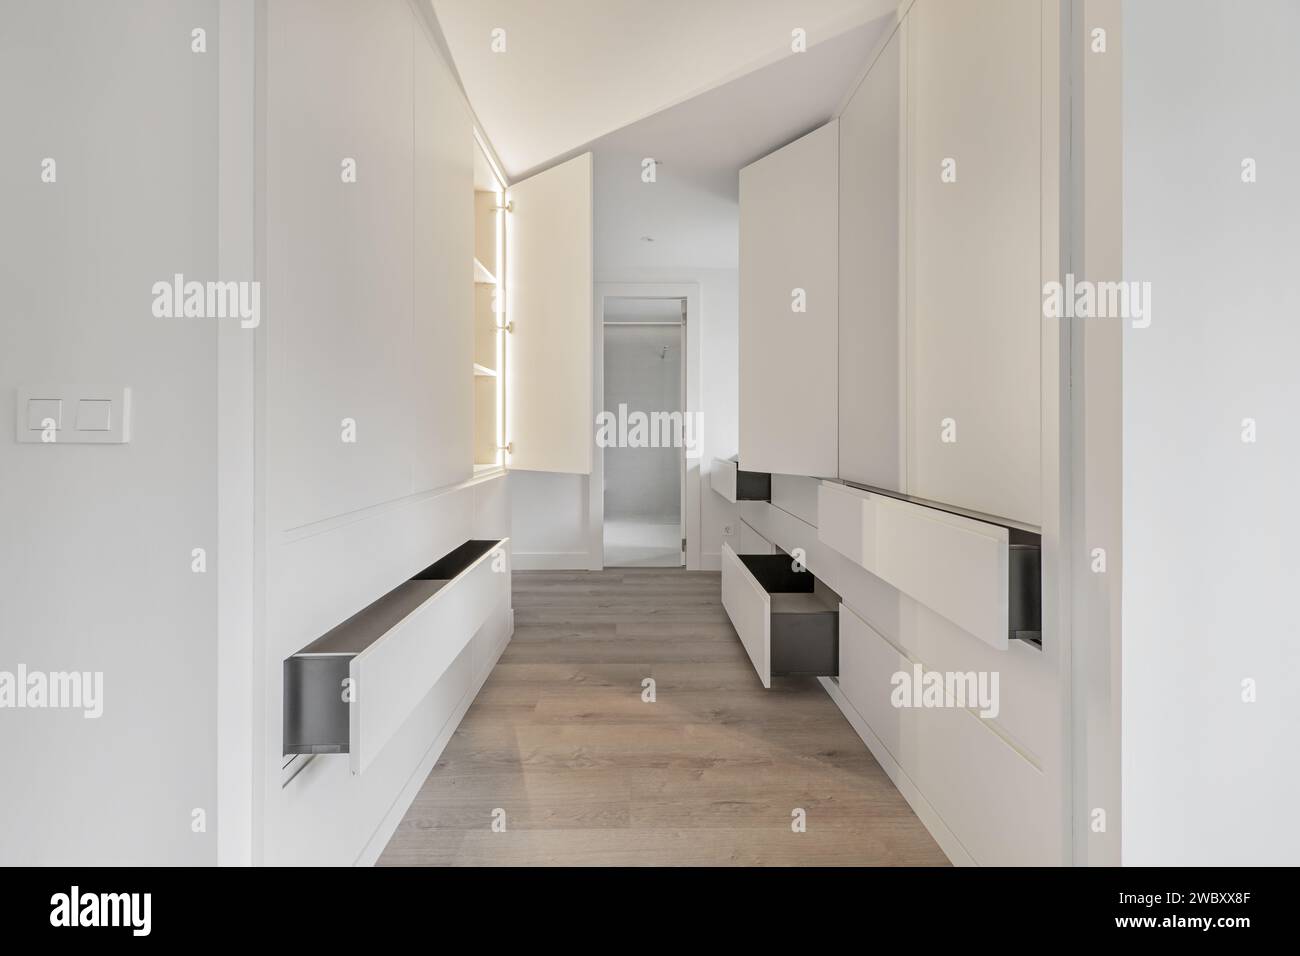 A dressing hallway that leads to an en-suite bathroom with open drawers and doors in the closets and LED lights inside Stock Photo